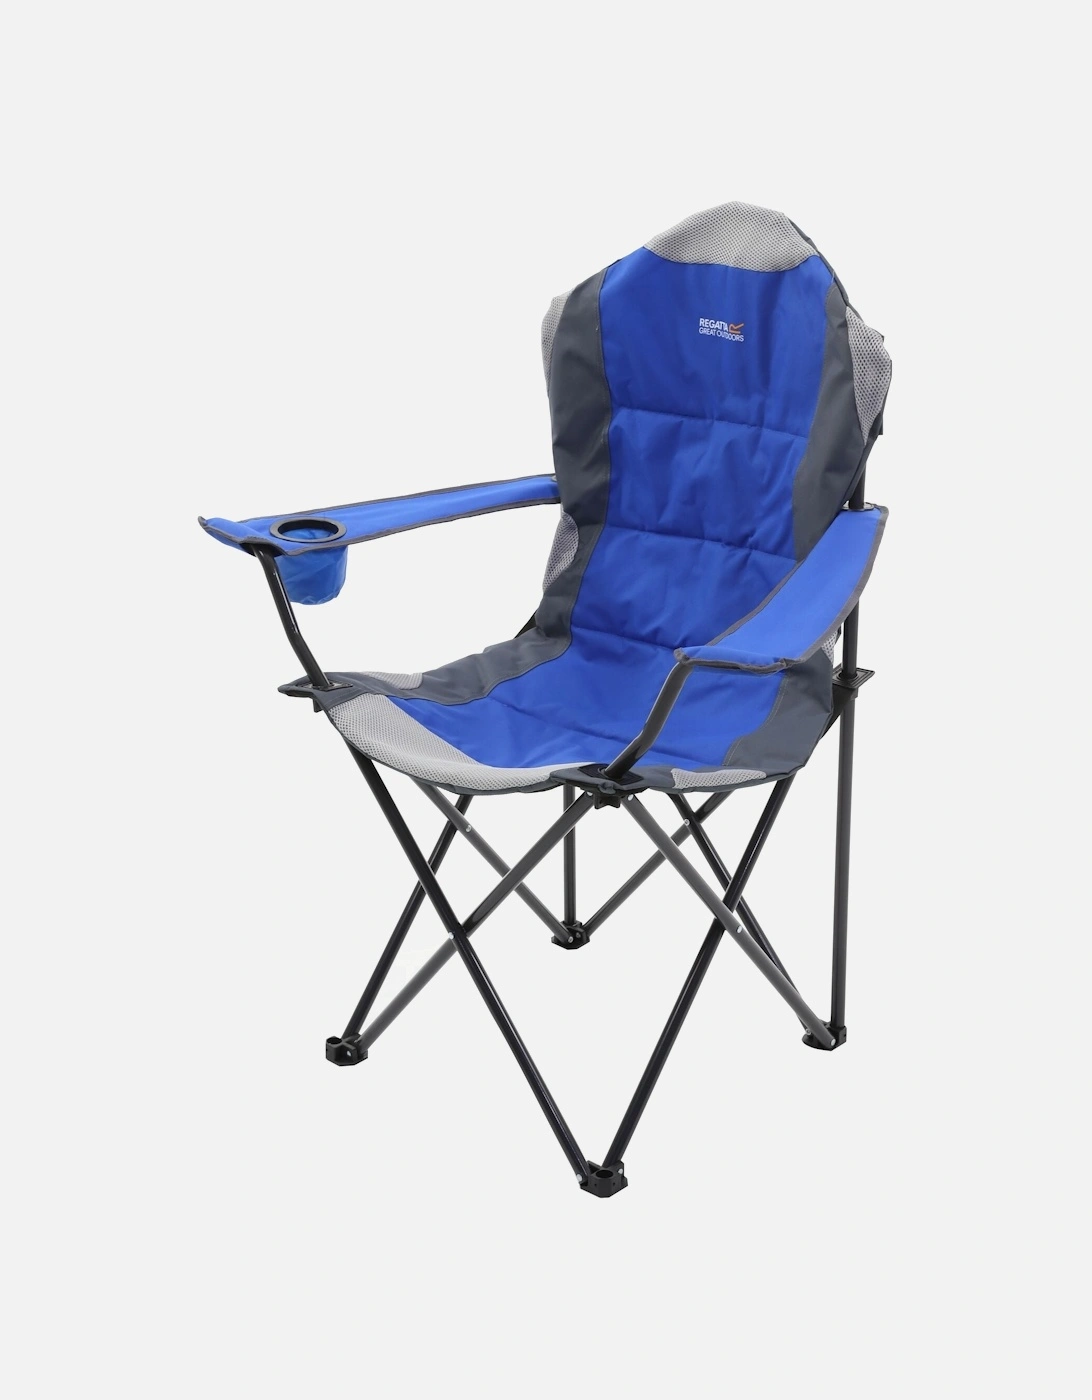 Kruza Padded Camping Chair With Storage Bag